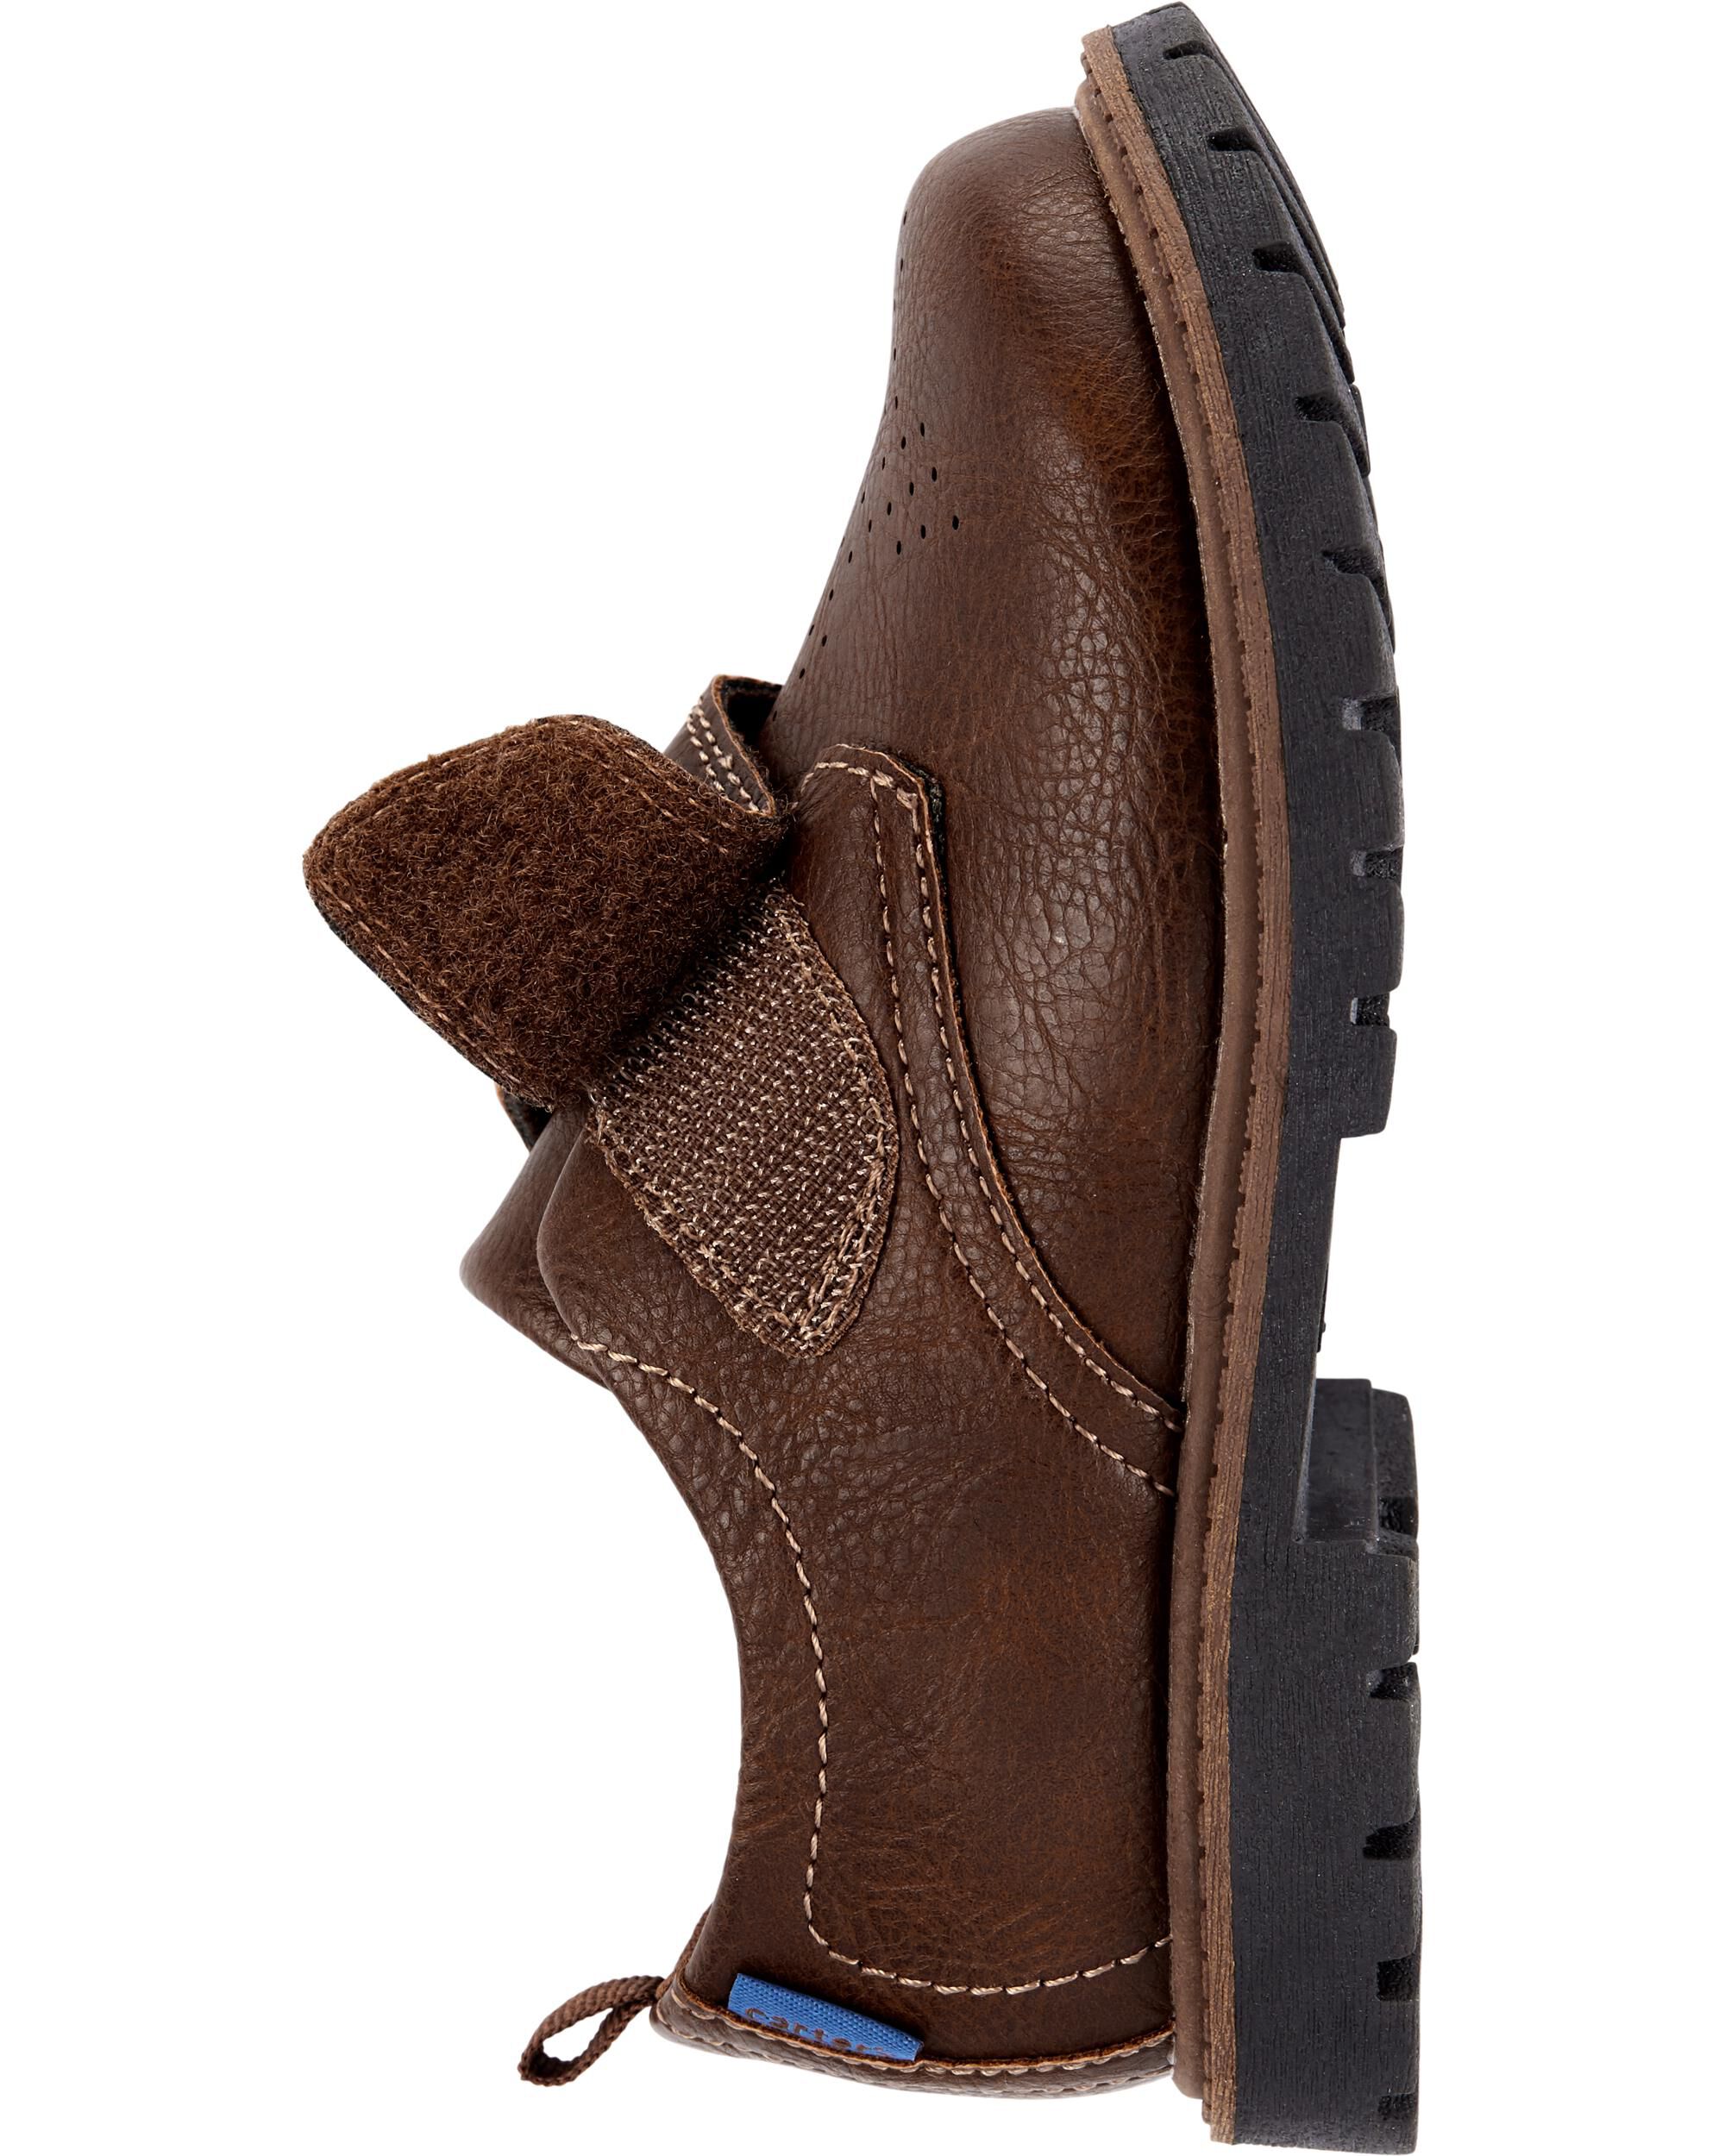 carters oxford dress shoes